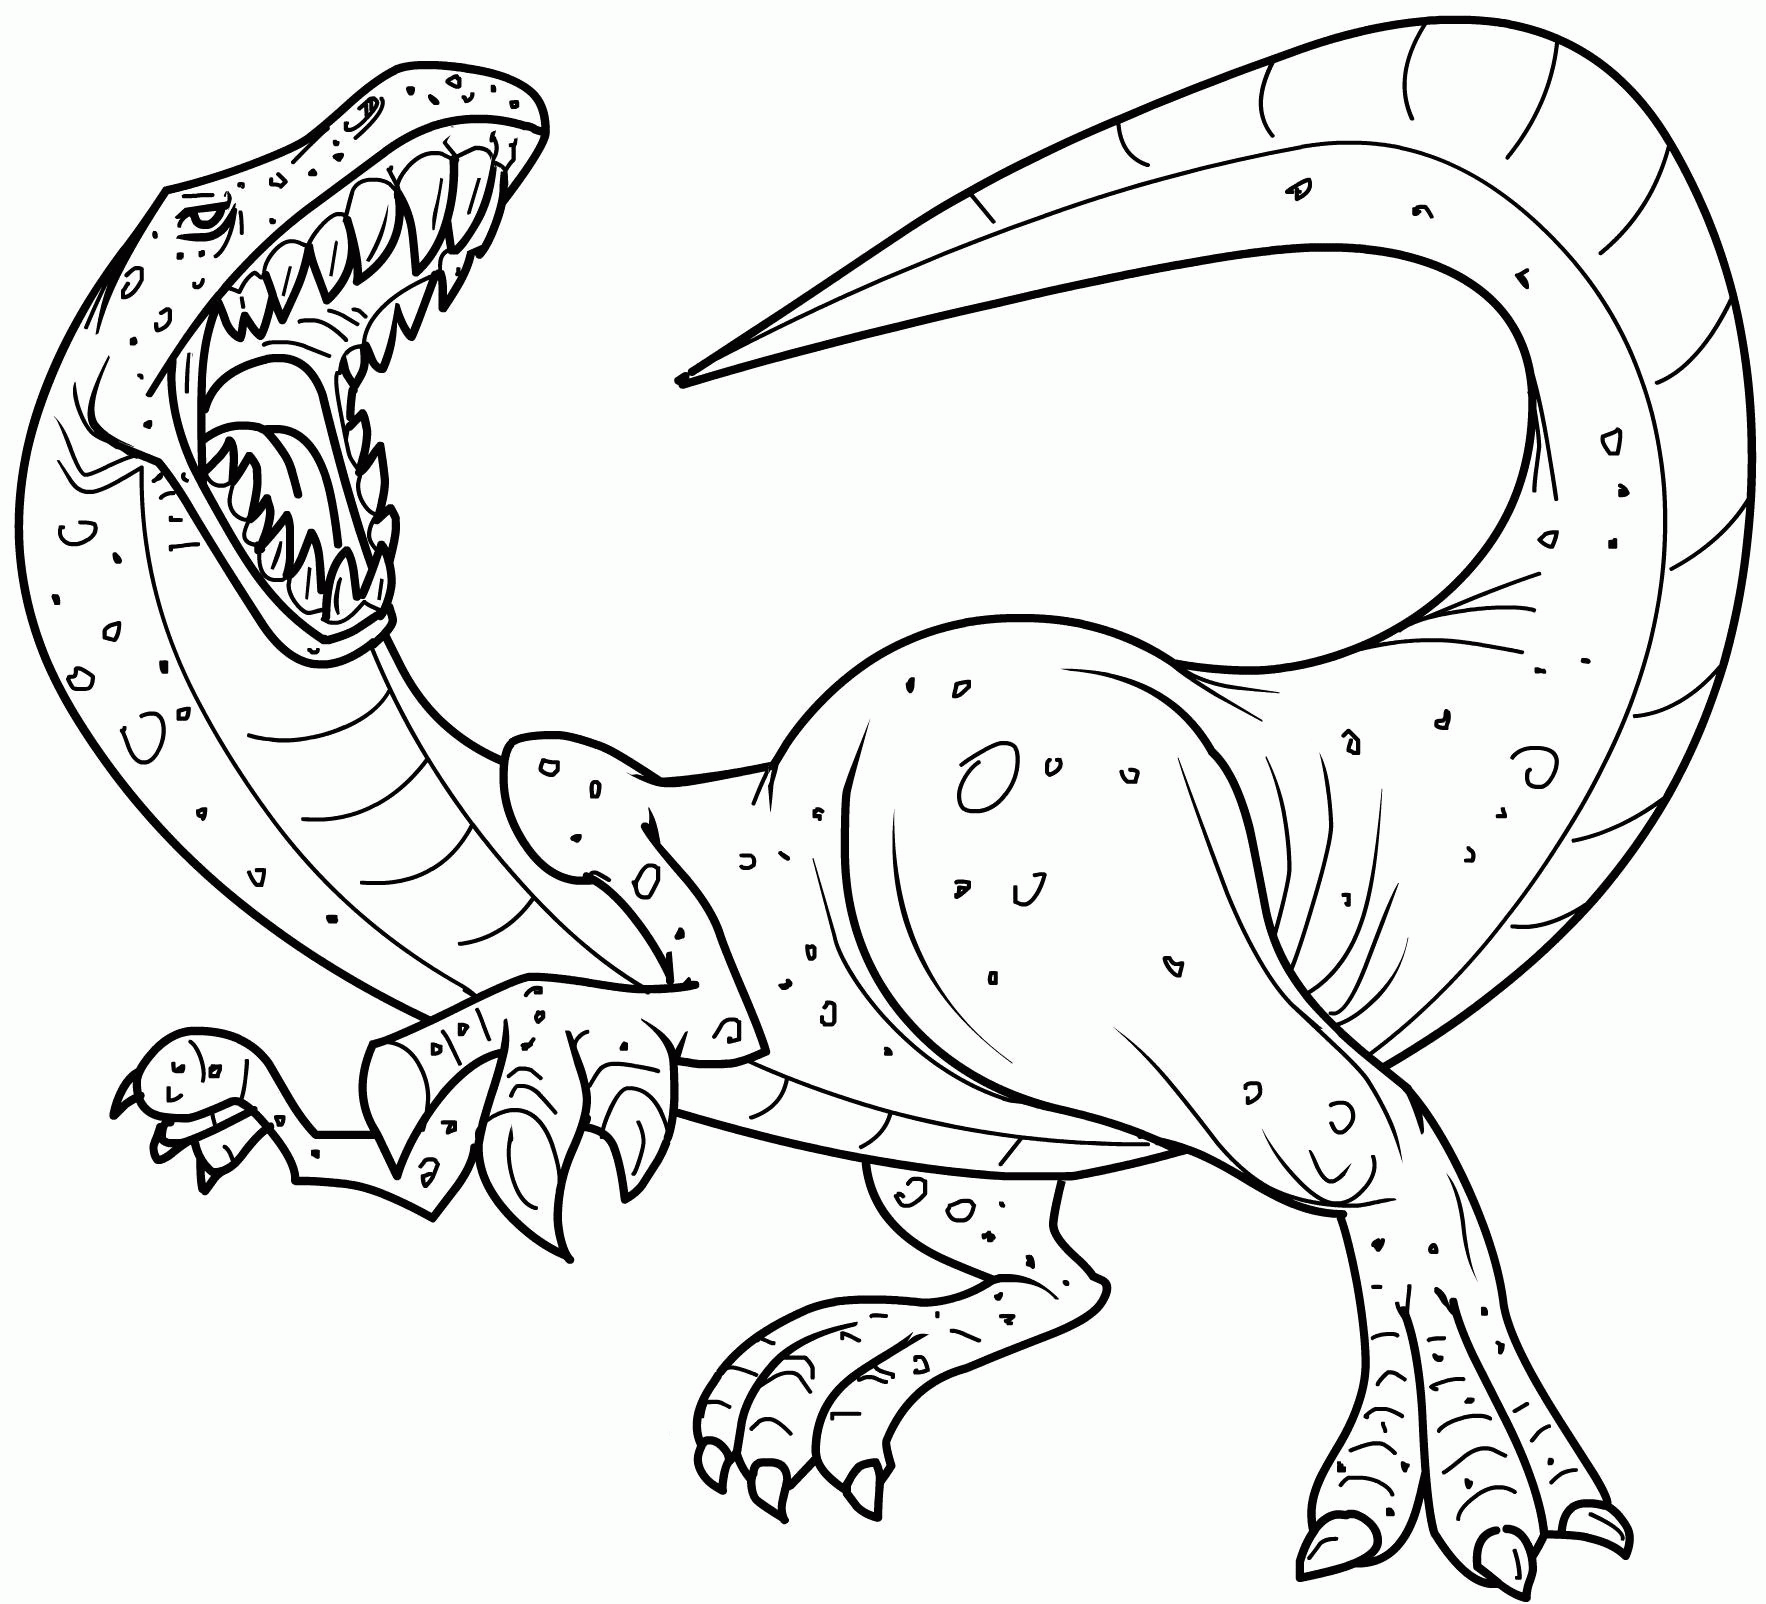 Dinosaur To Print - Coloring Pages for Kids and for Adults